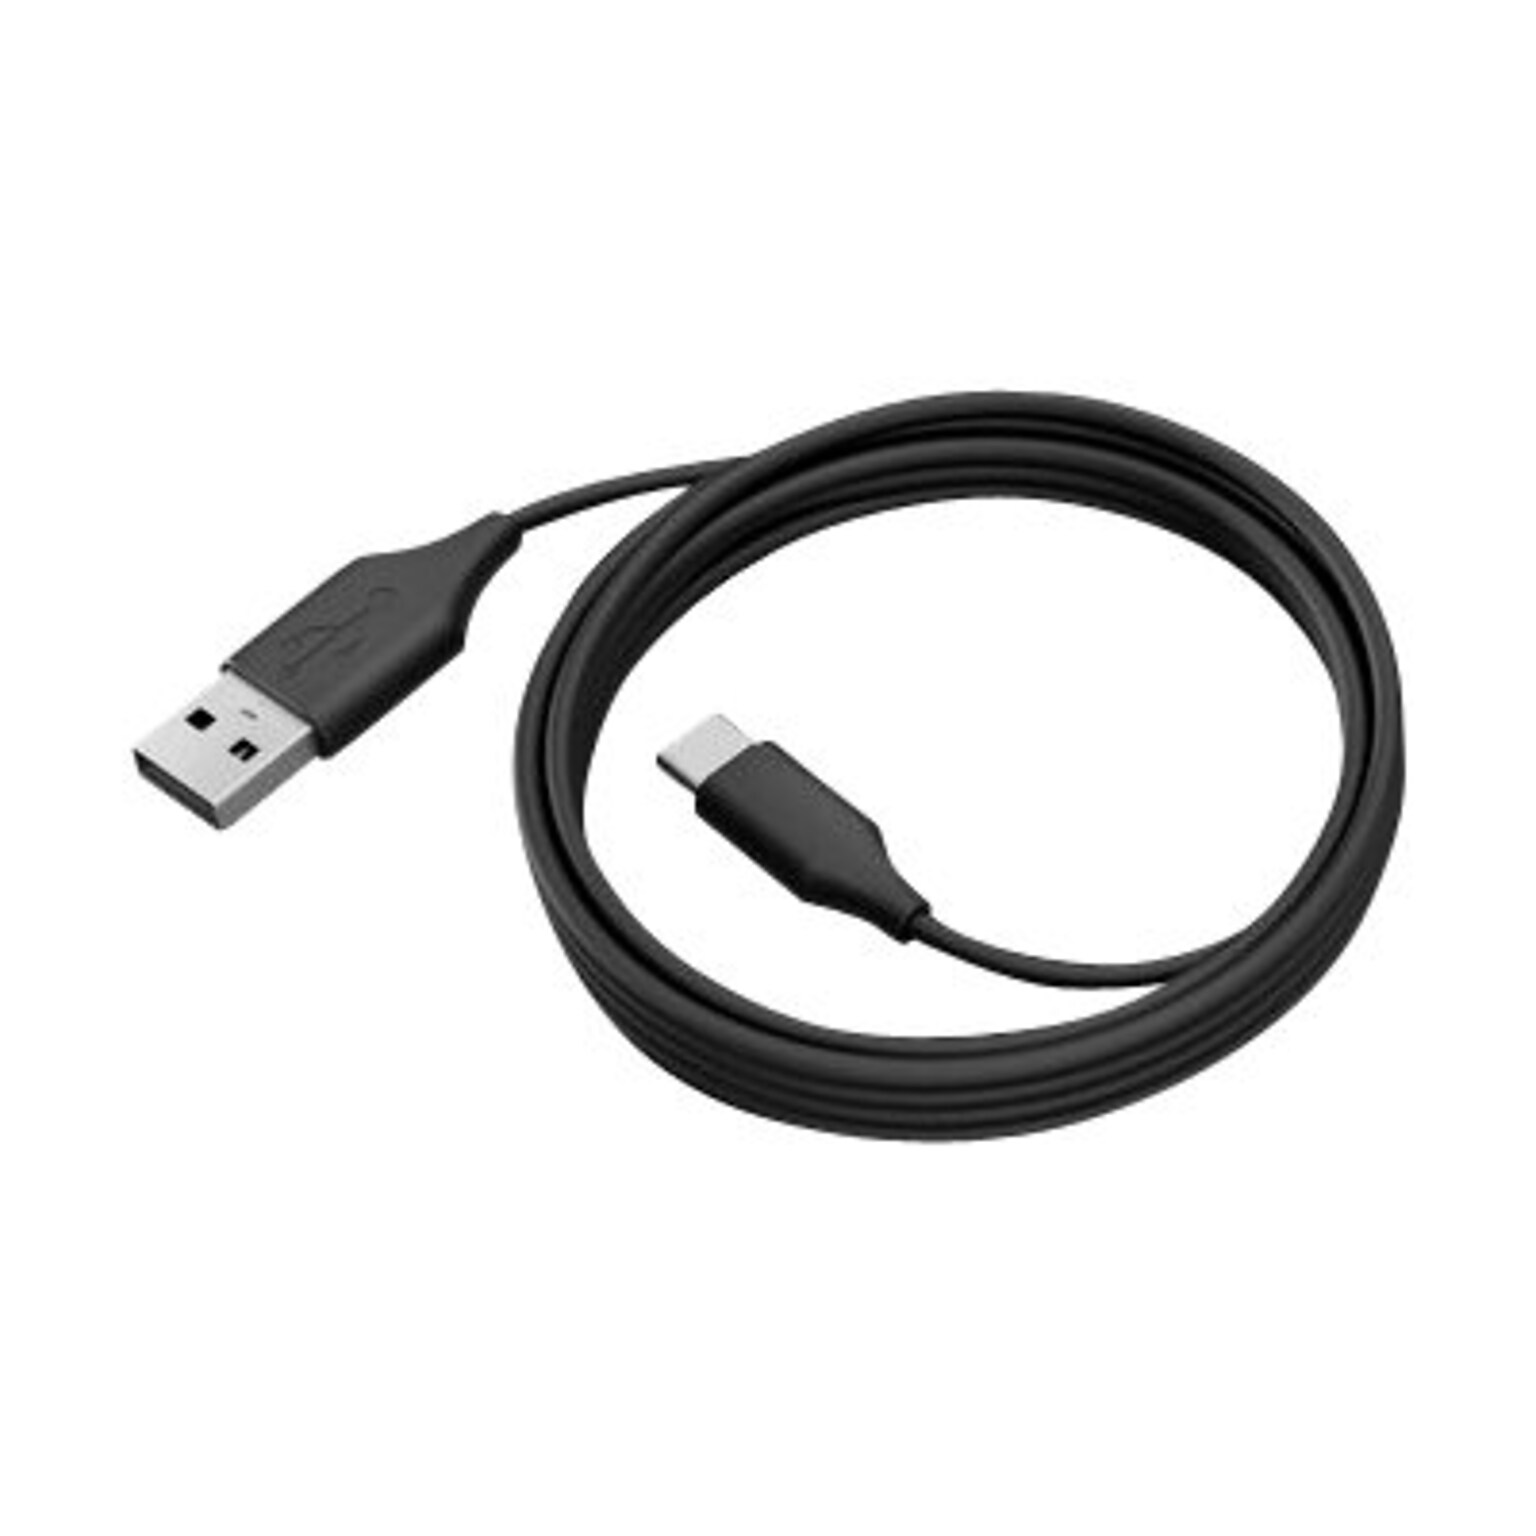 Jabra 6.56 USB C to A Cable, Black (14202-10)